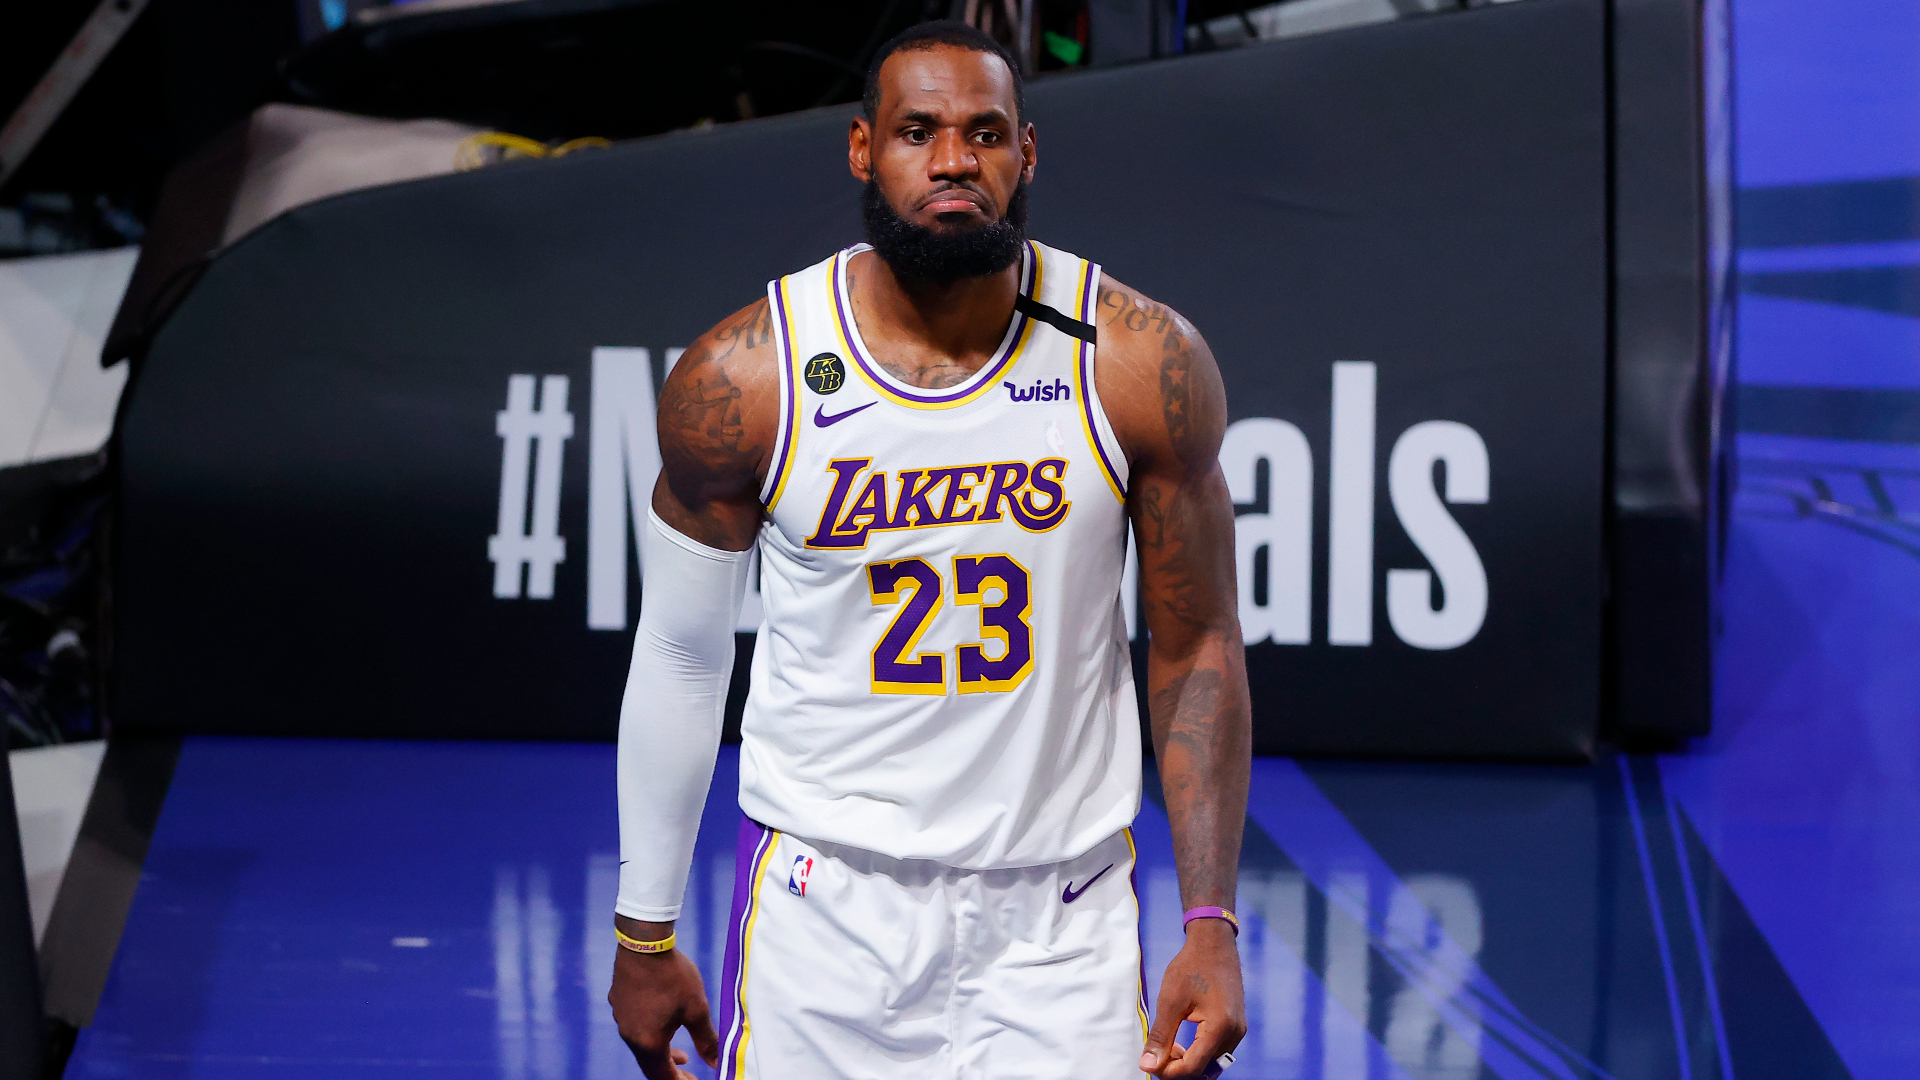 LeBron James hinting at roster changes on the Lakers